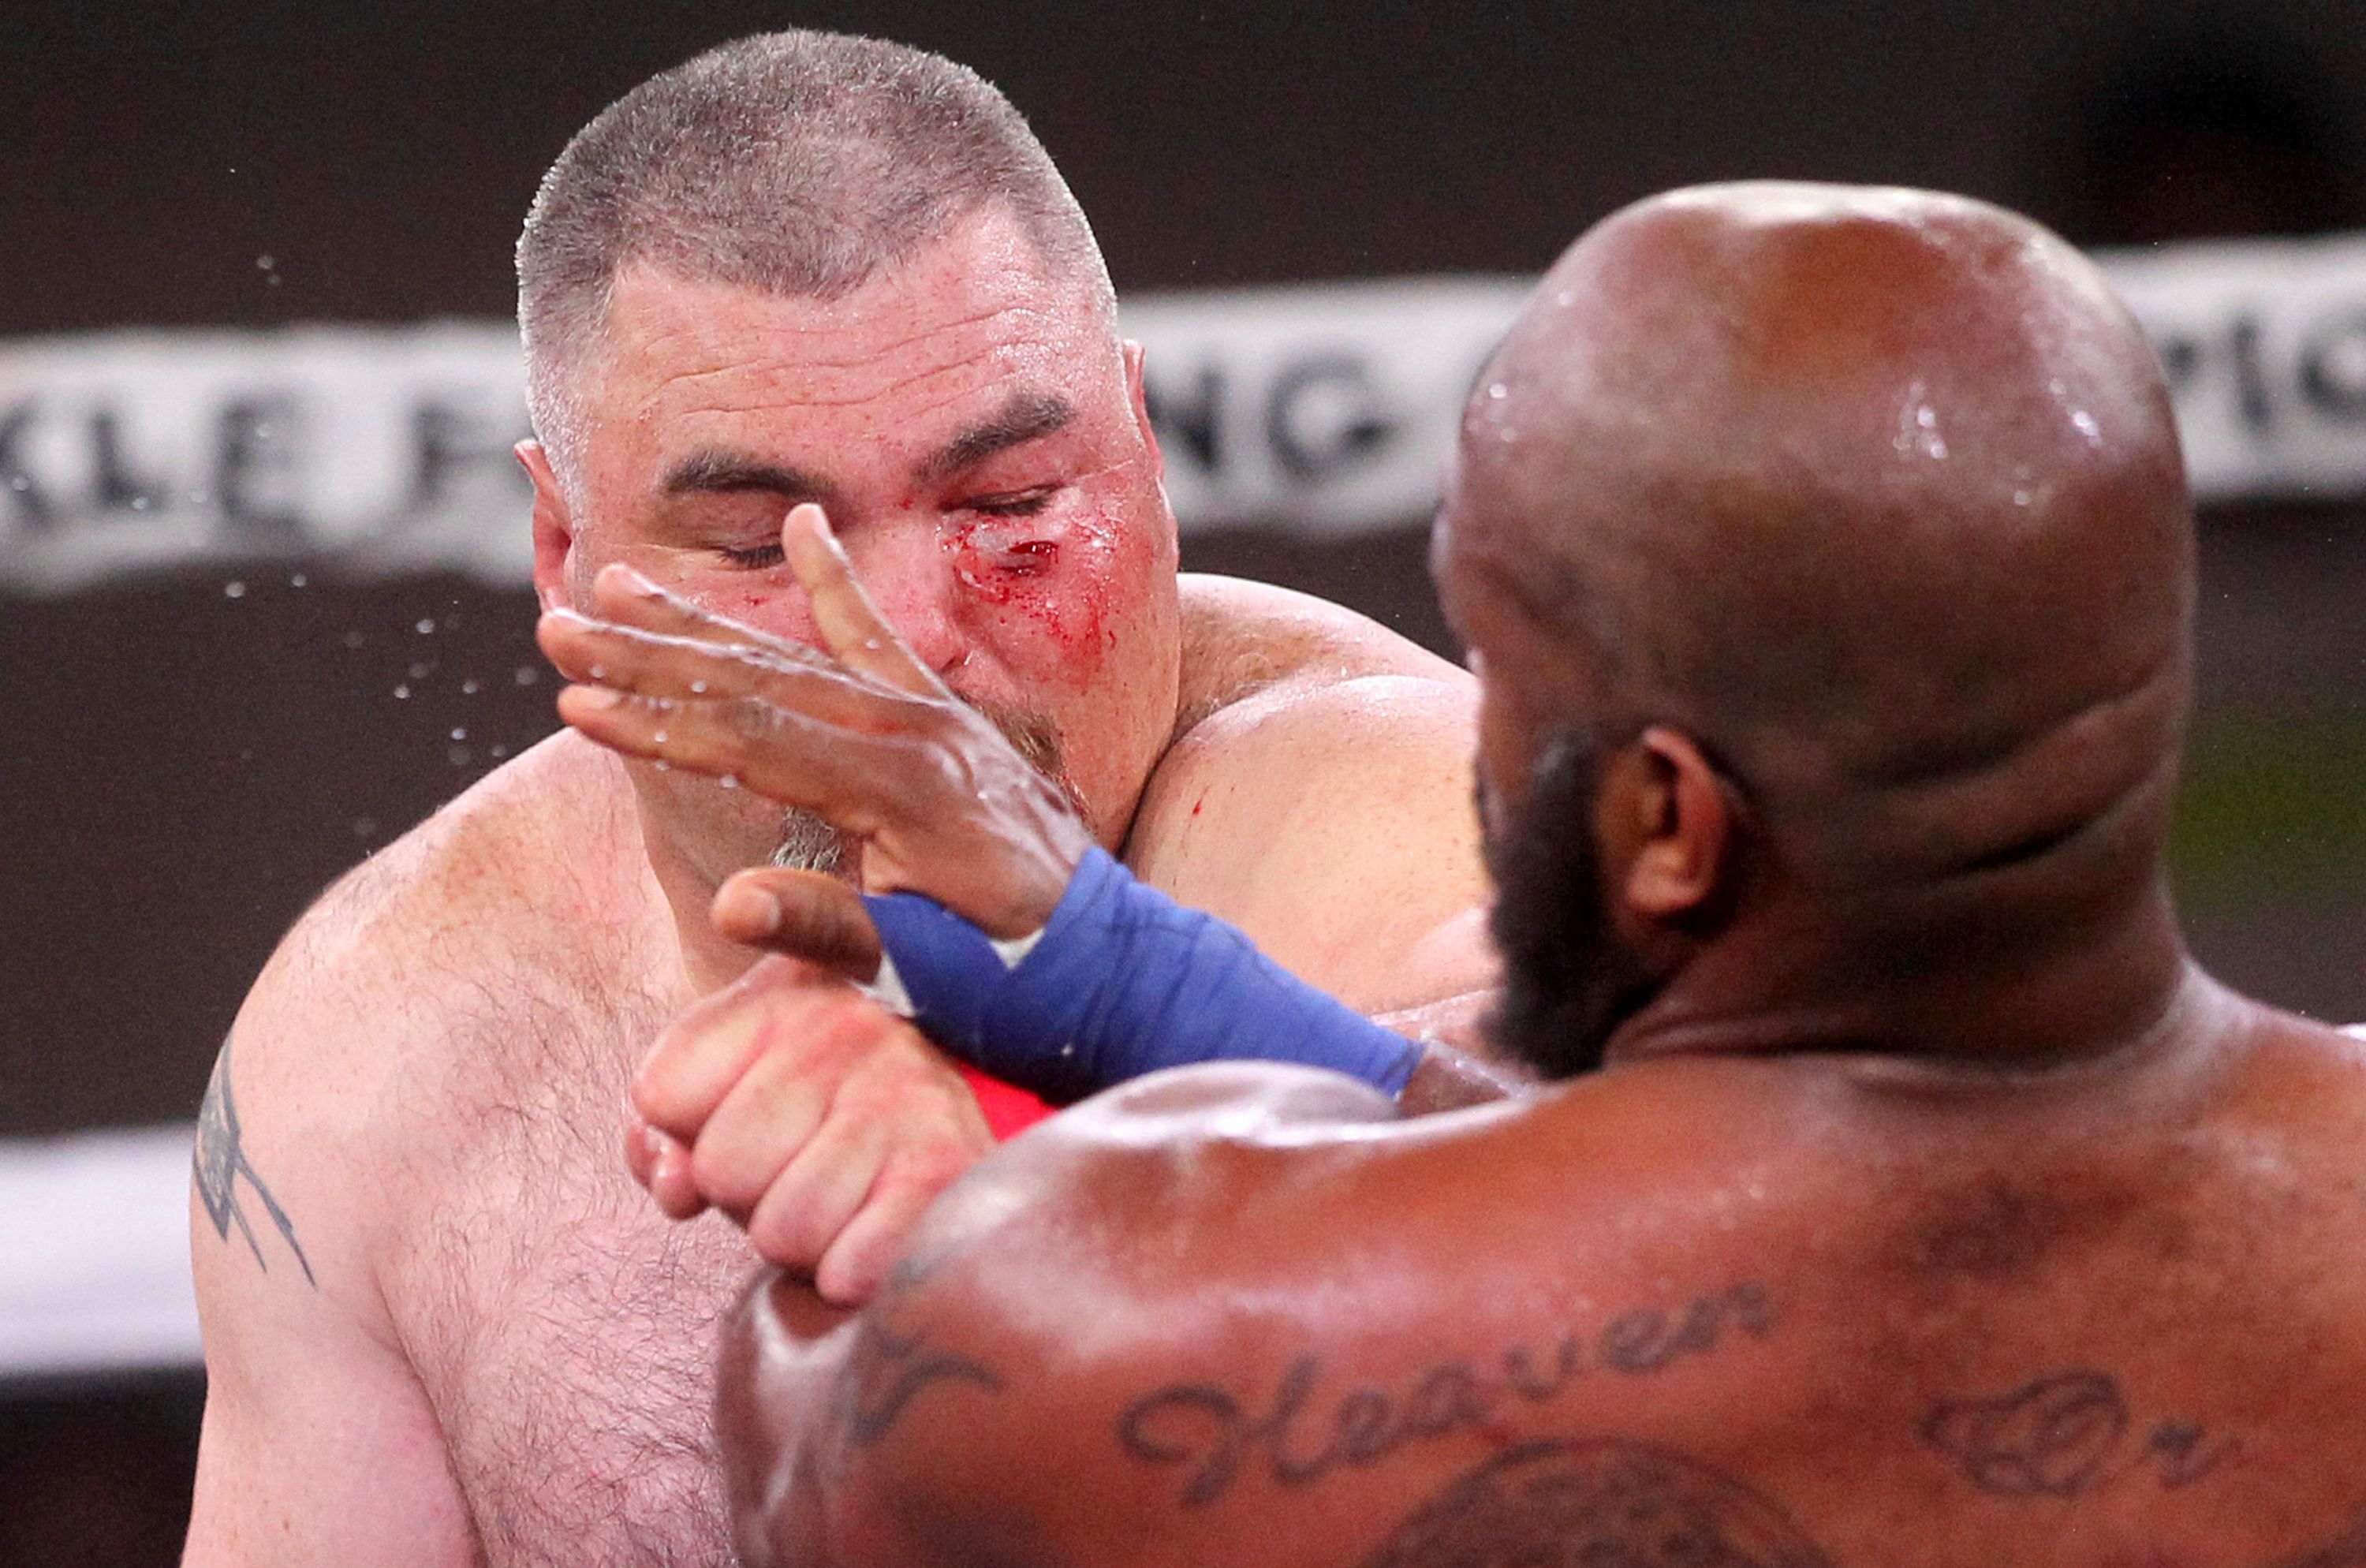 Legal bare-knuckle fighting makes bloody debut in Wyoming The Seattle Times